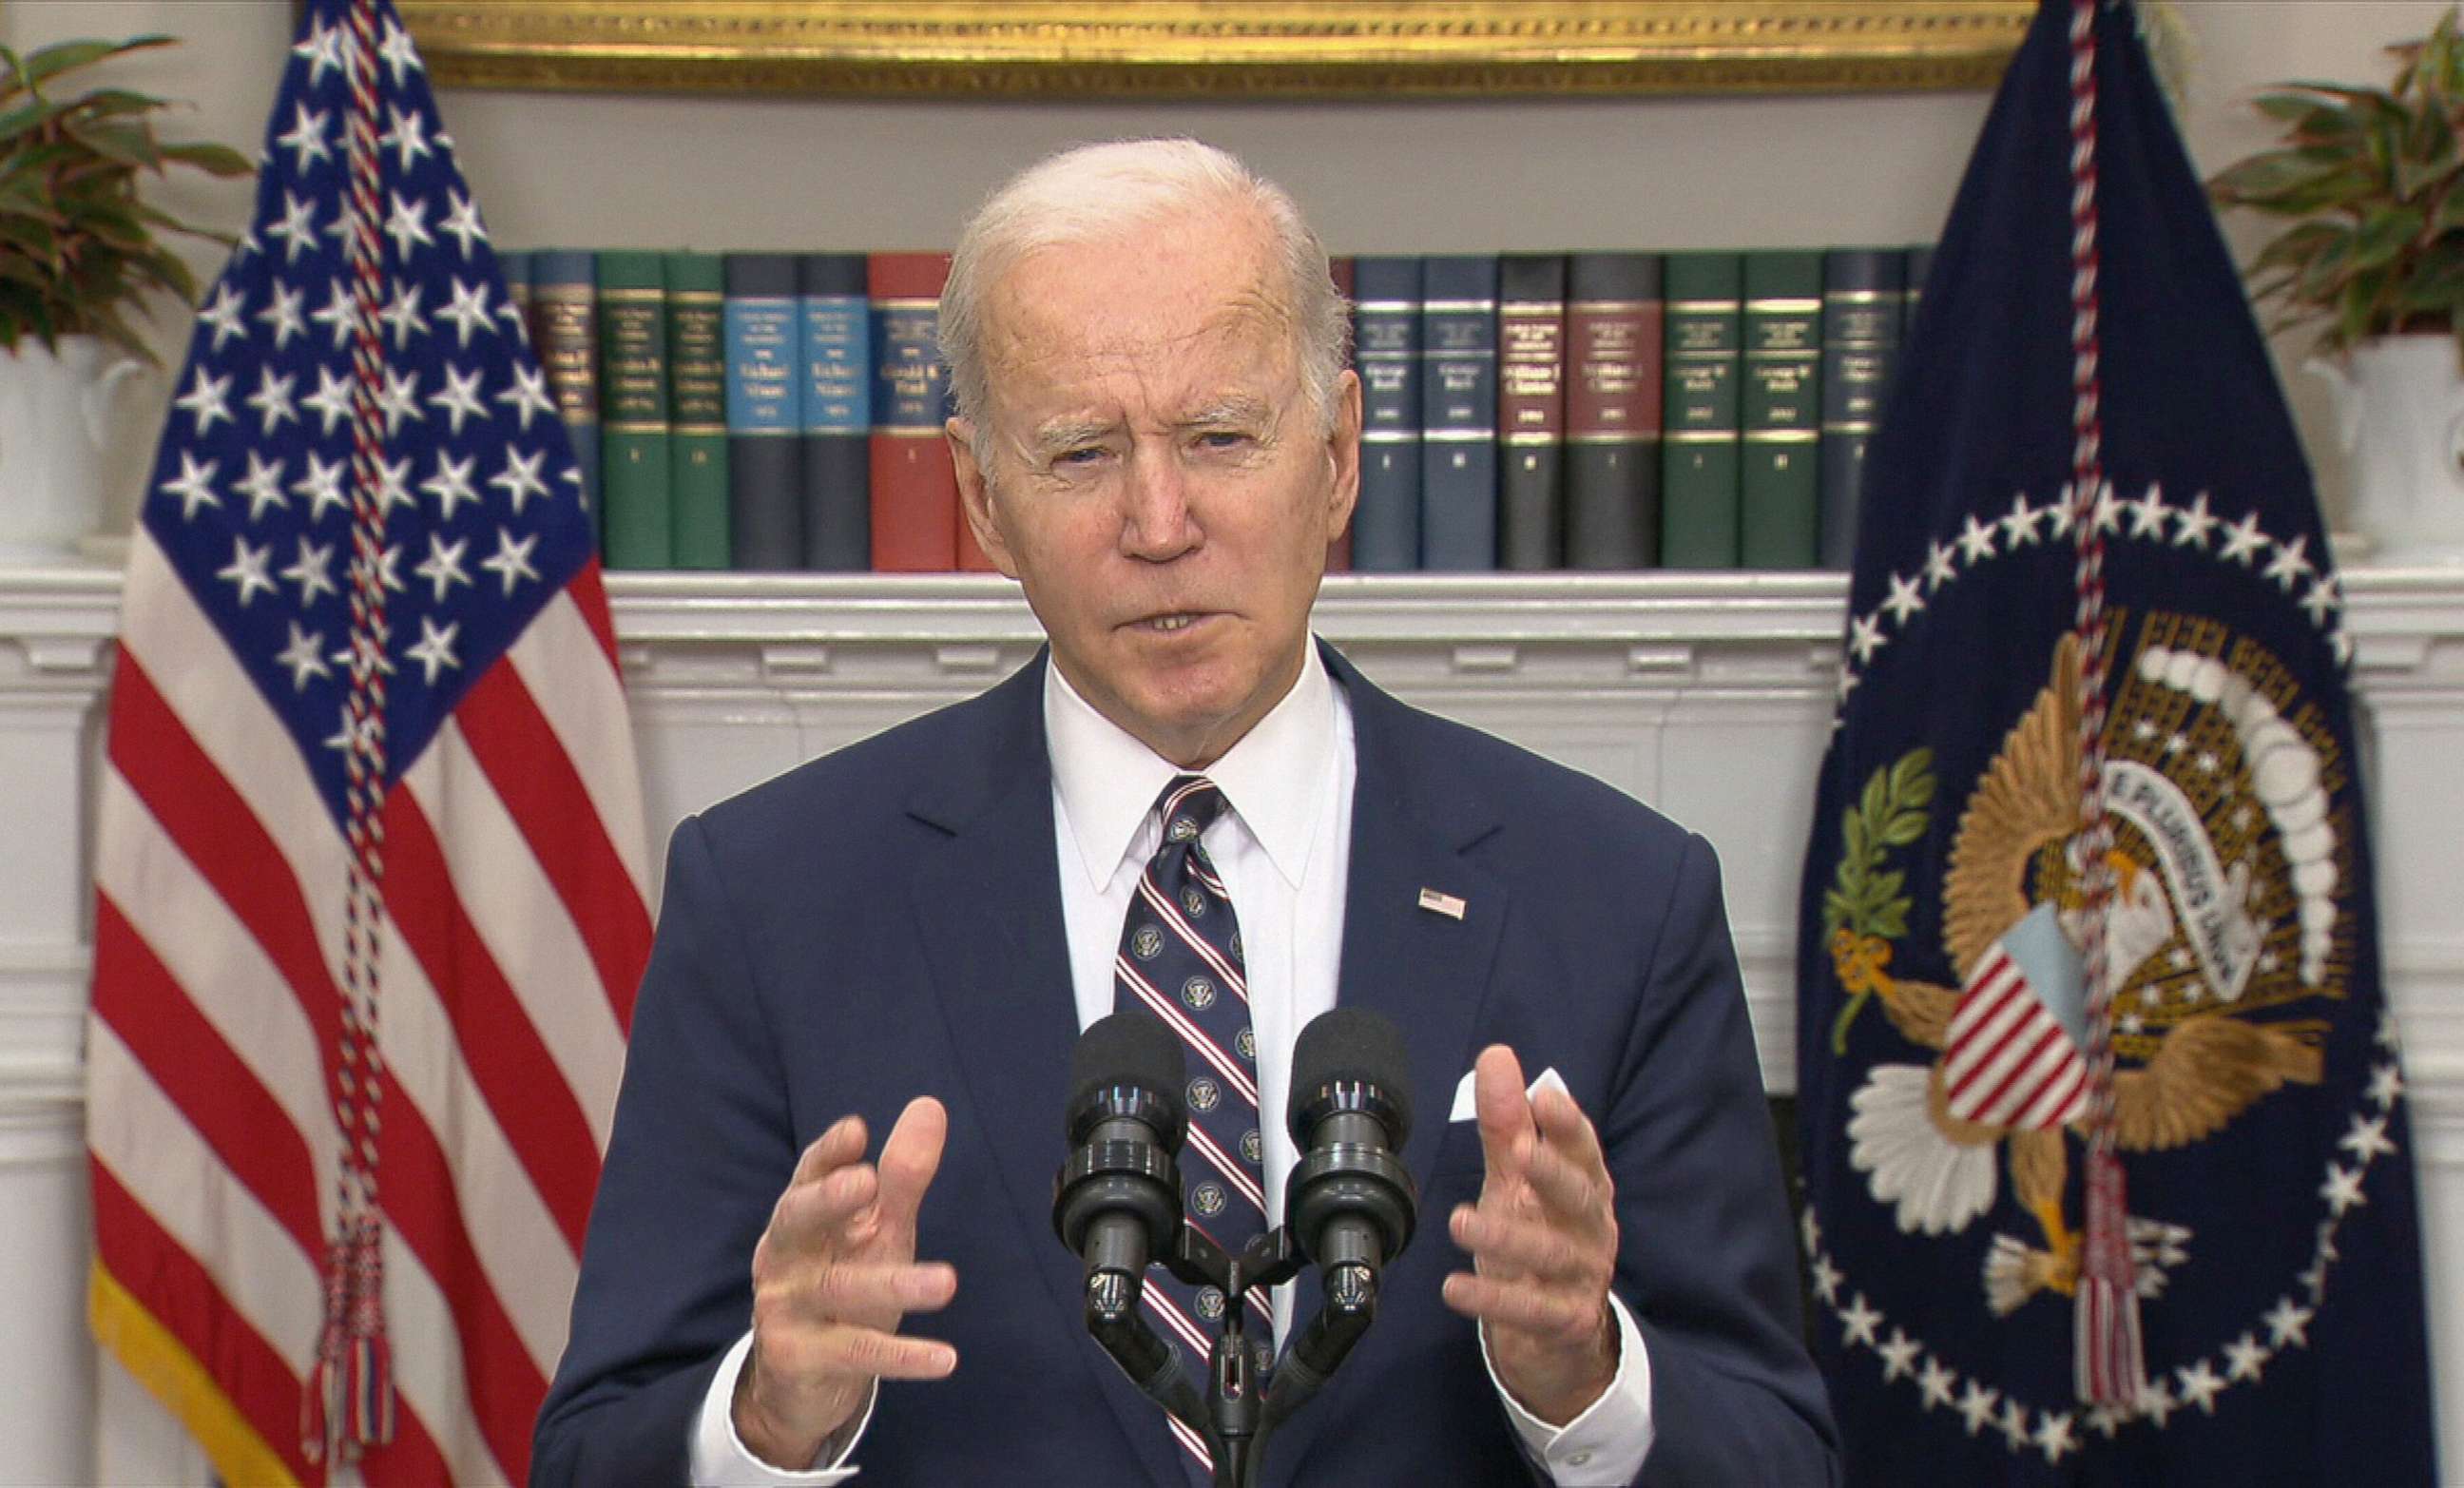 PHOTO: President Joe Biden speaks about a counterterrorism operation in Syria targeting the leader of ISIS, from the Roosevet Room at the White House on Feb. 3, 2022, in Washington, D.C.